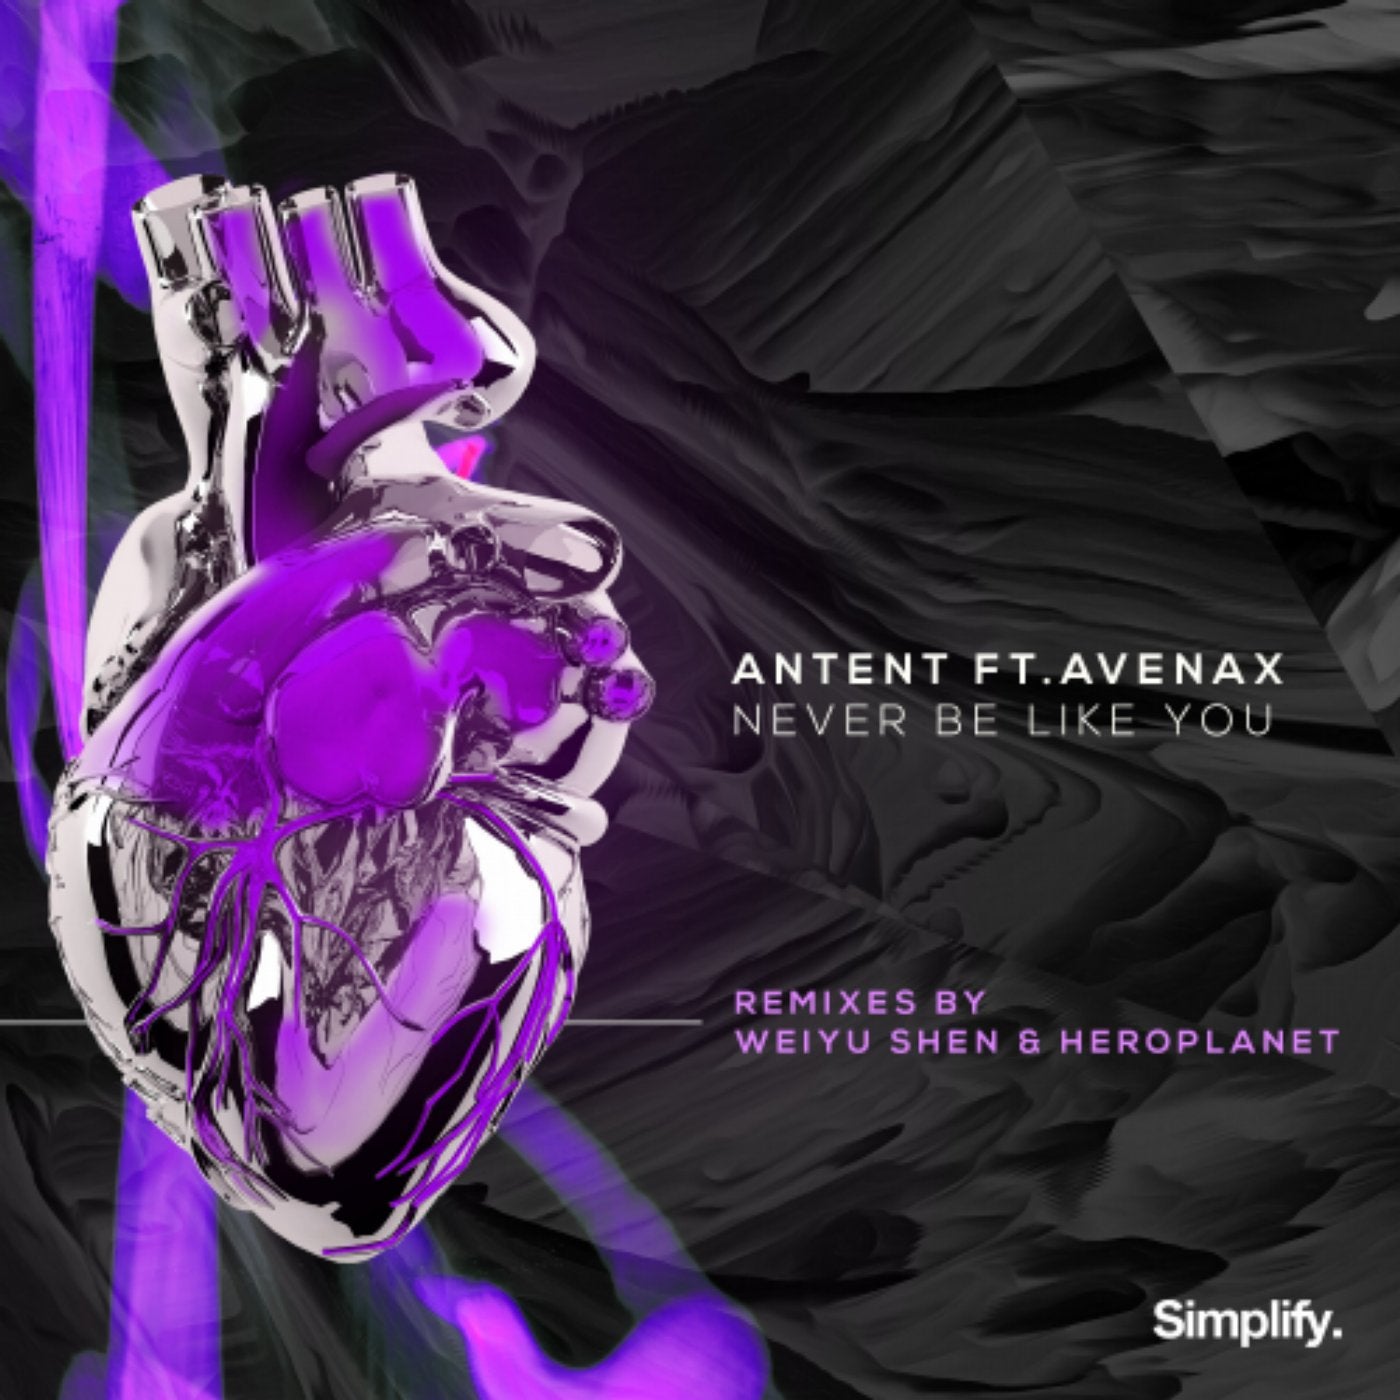 Antent hope to see. Avenax. Antent. UNDXXD Antent believe. Antent Pulse Remixes.